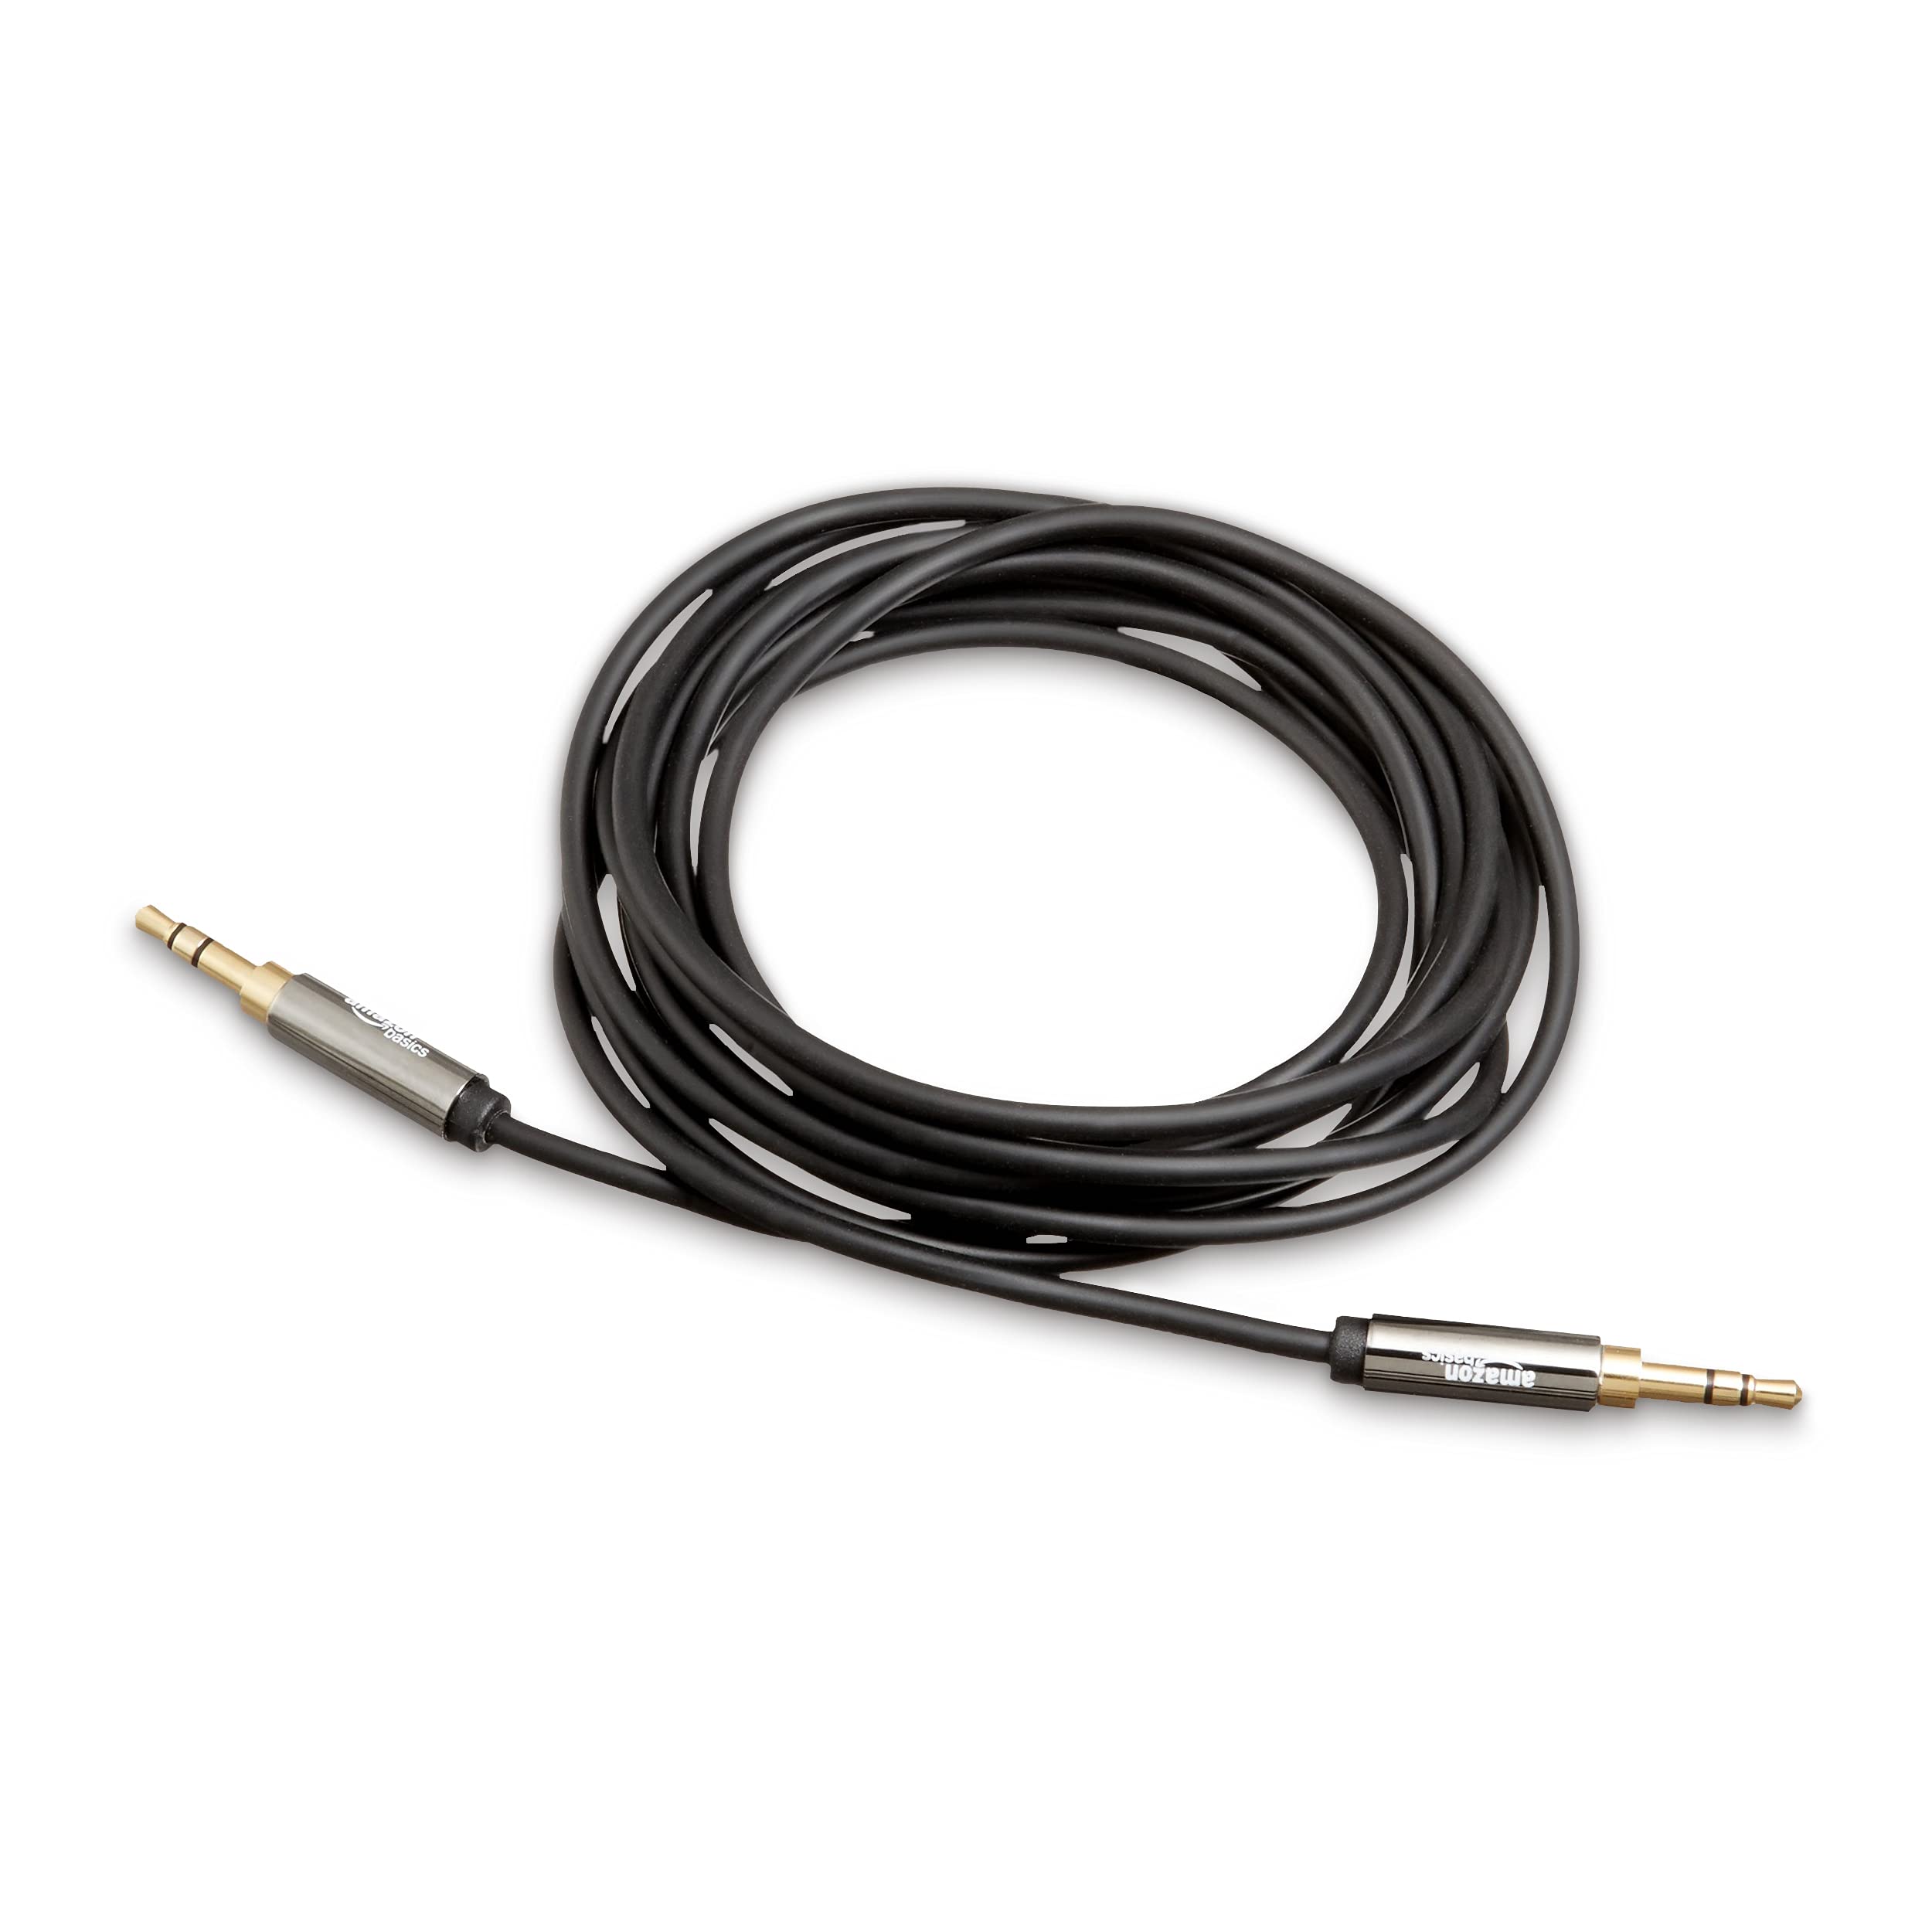 Amazon Basics 3.5mm Aux Audio Cable for Stereo Speaker or Subwoofer with Gold-Plated Plugs, 8 Foot, Black